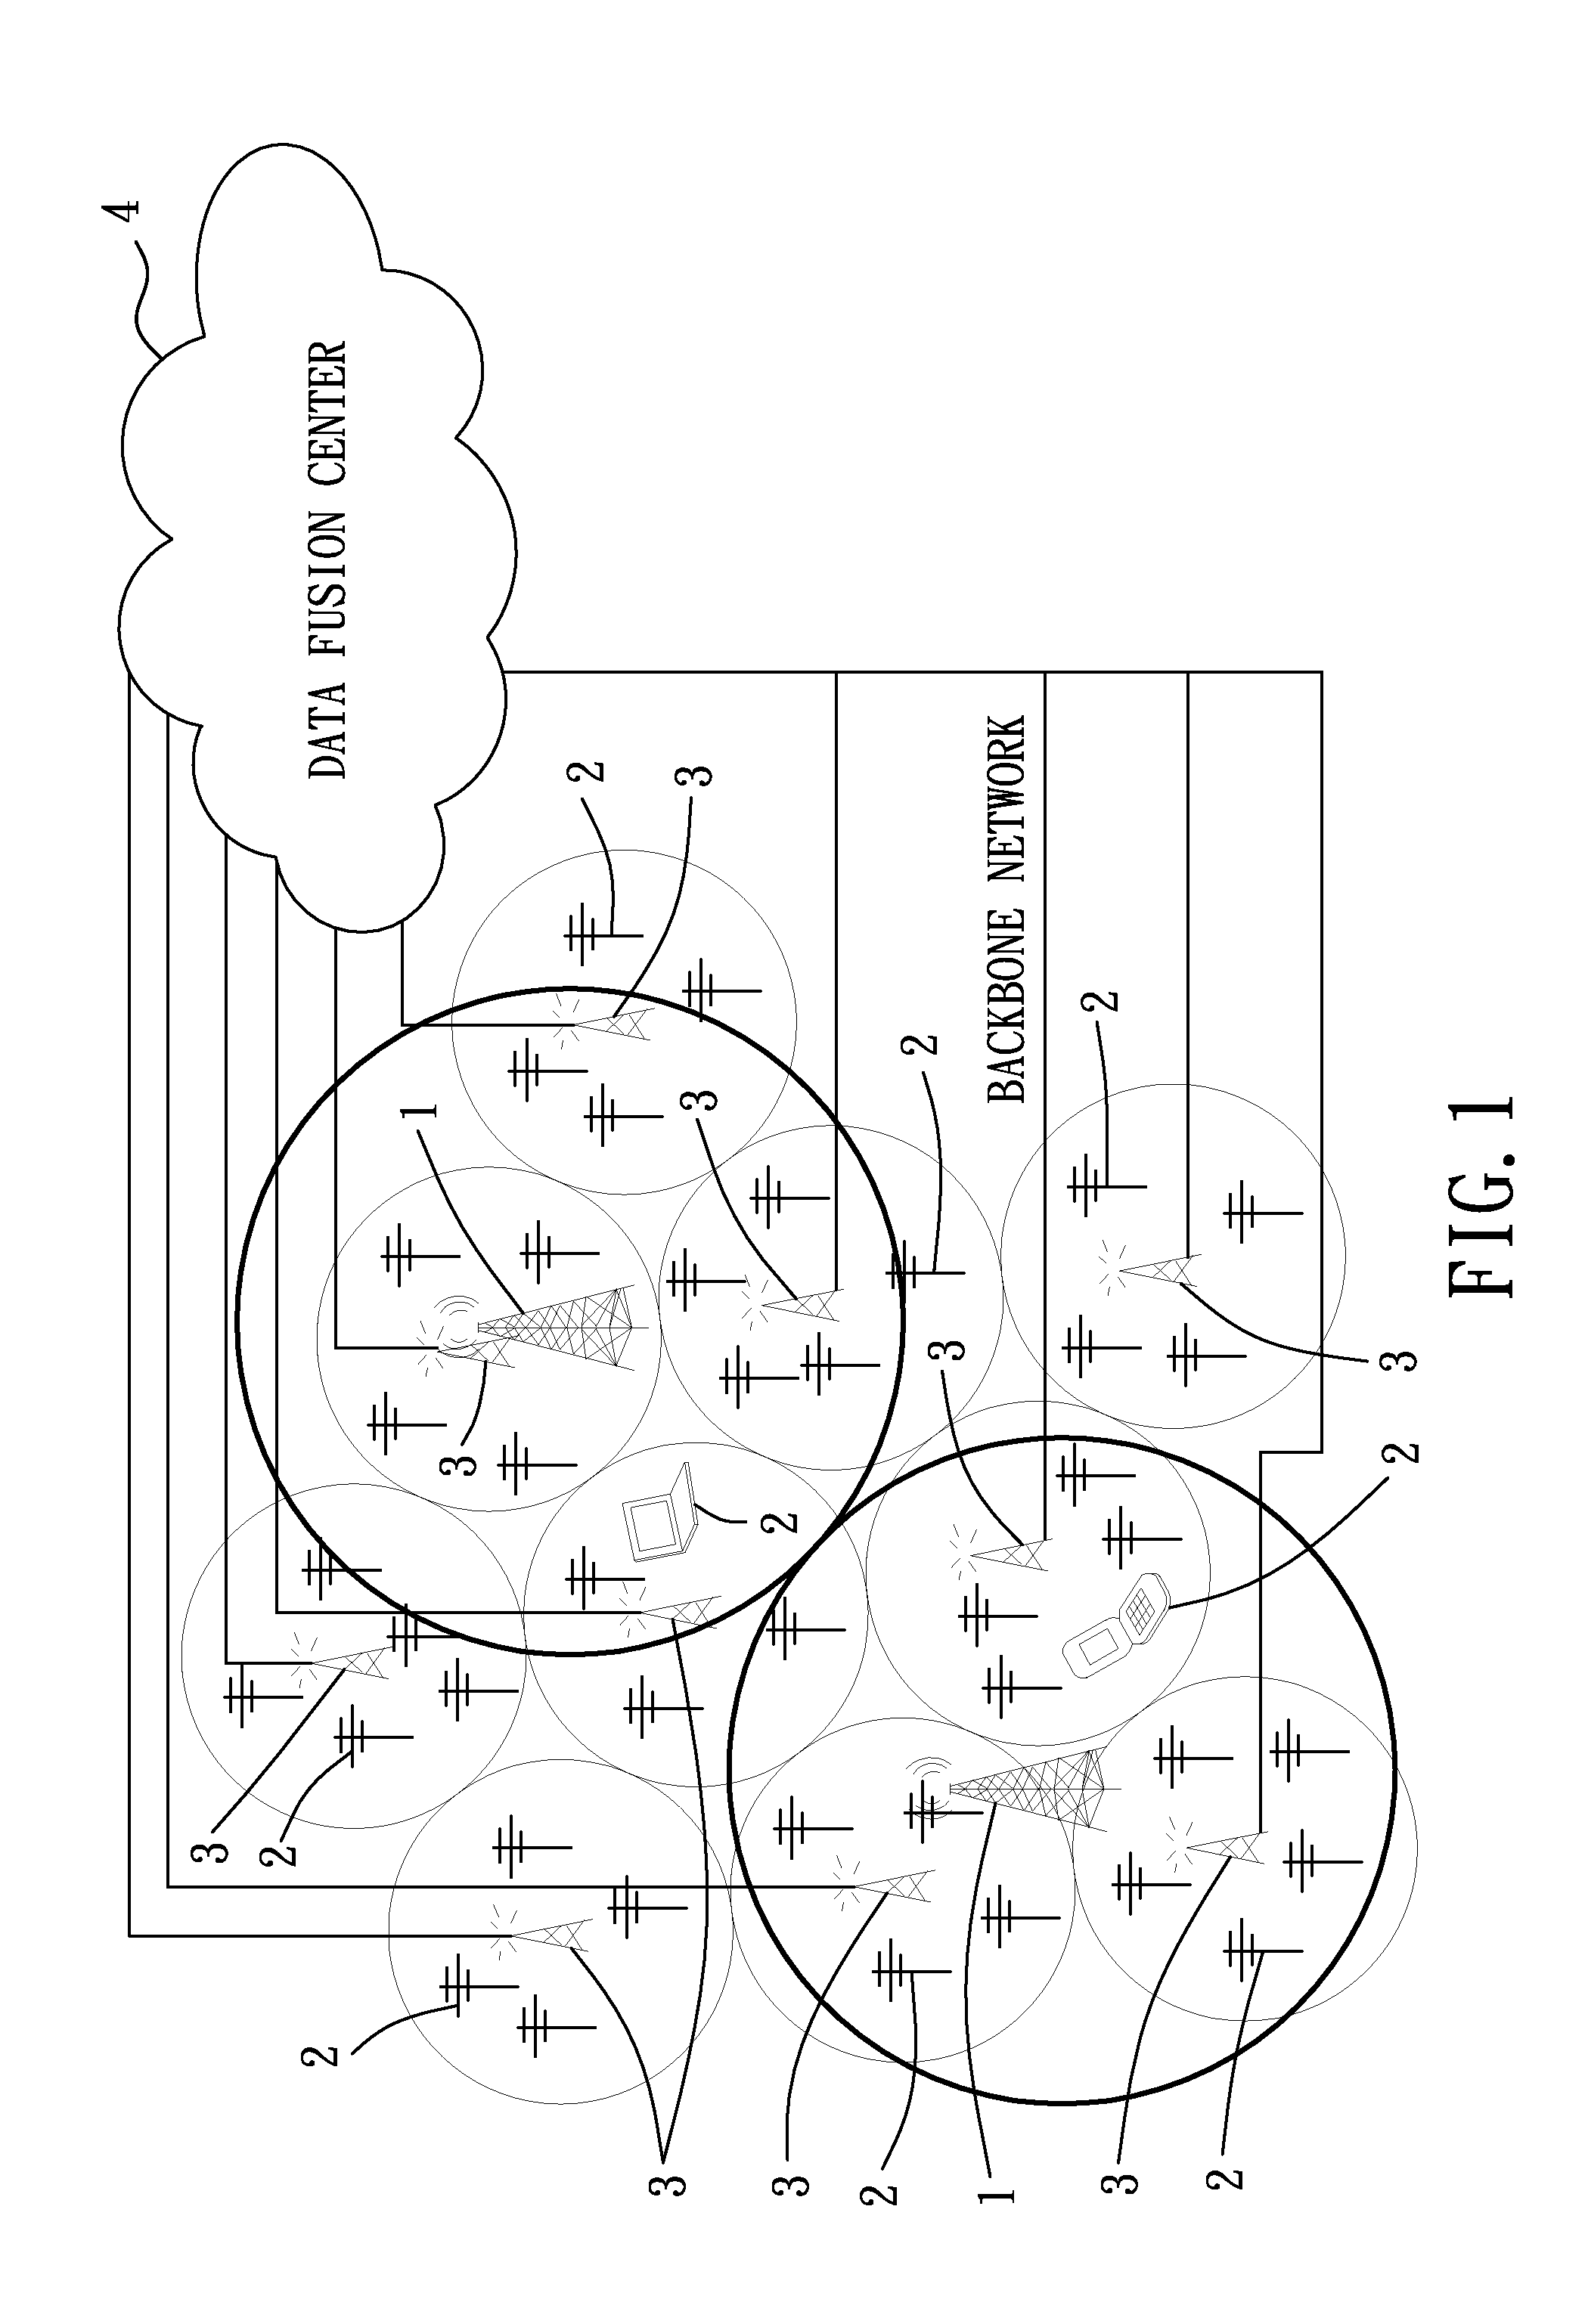 Cooperative spectrum sensing method and system for locationing primary transmitters in a cognitive radio system